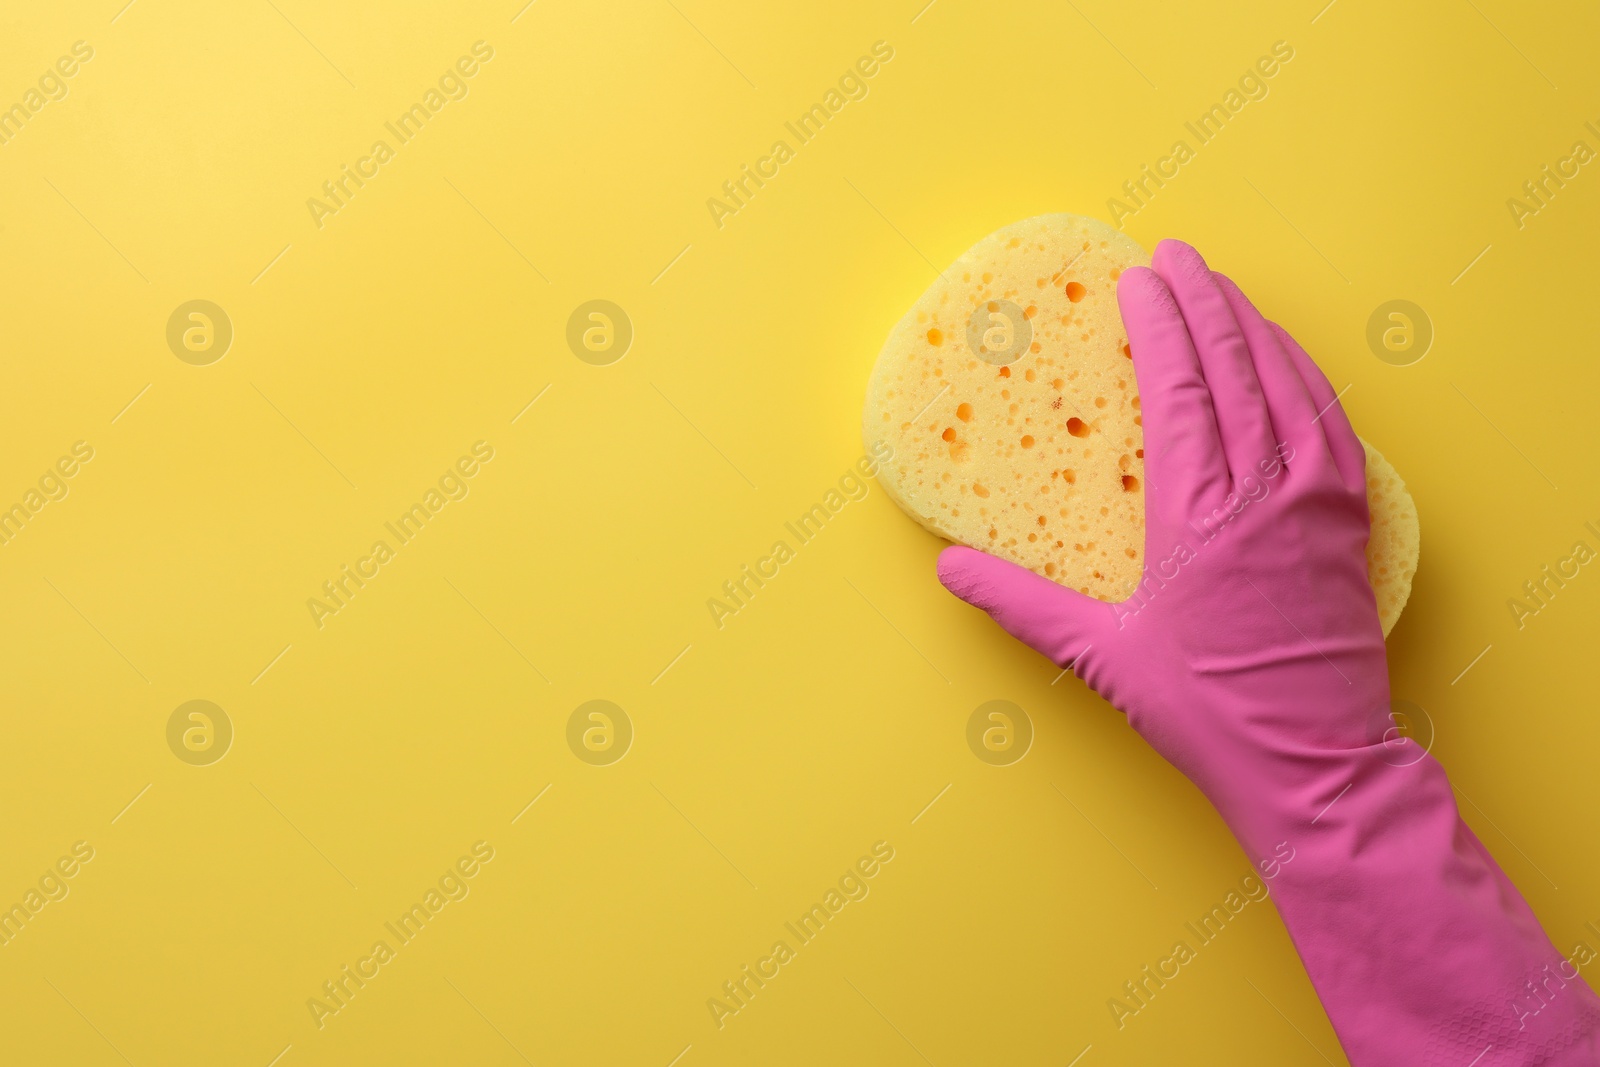 Photo of Cleaner in rubber glove holding new sponge on yellow background, top view. Space for text